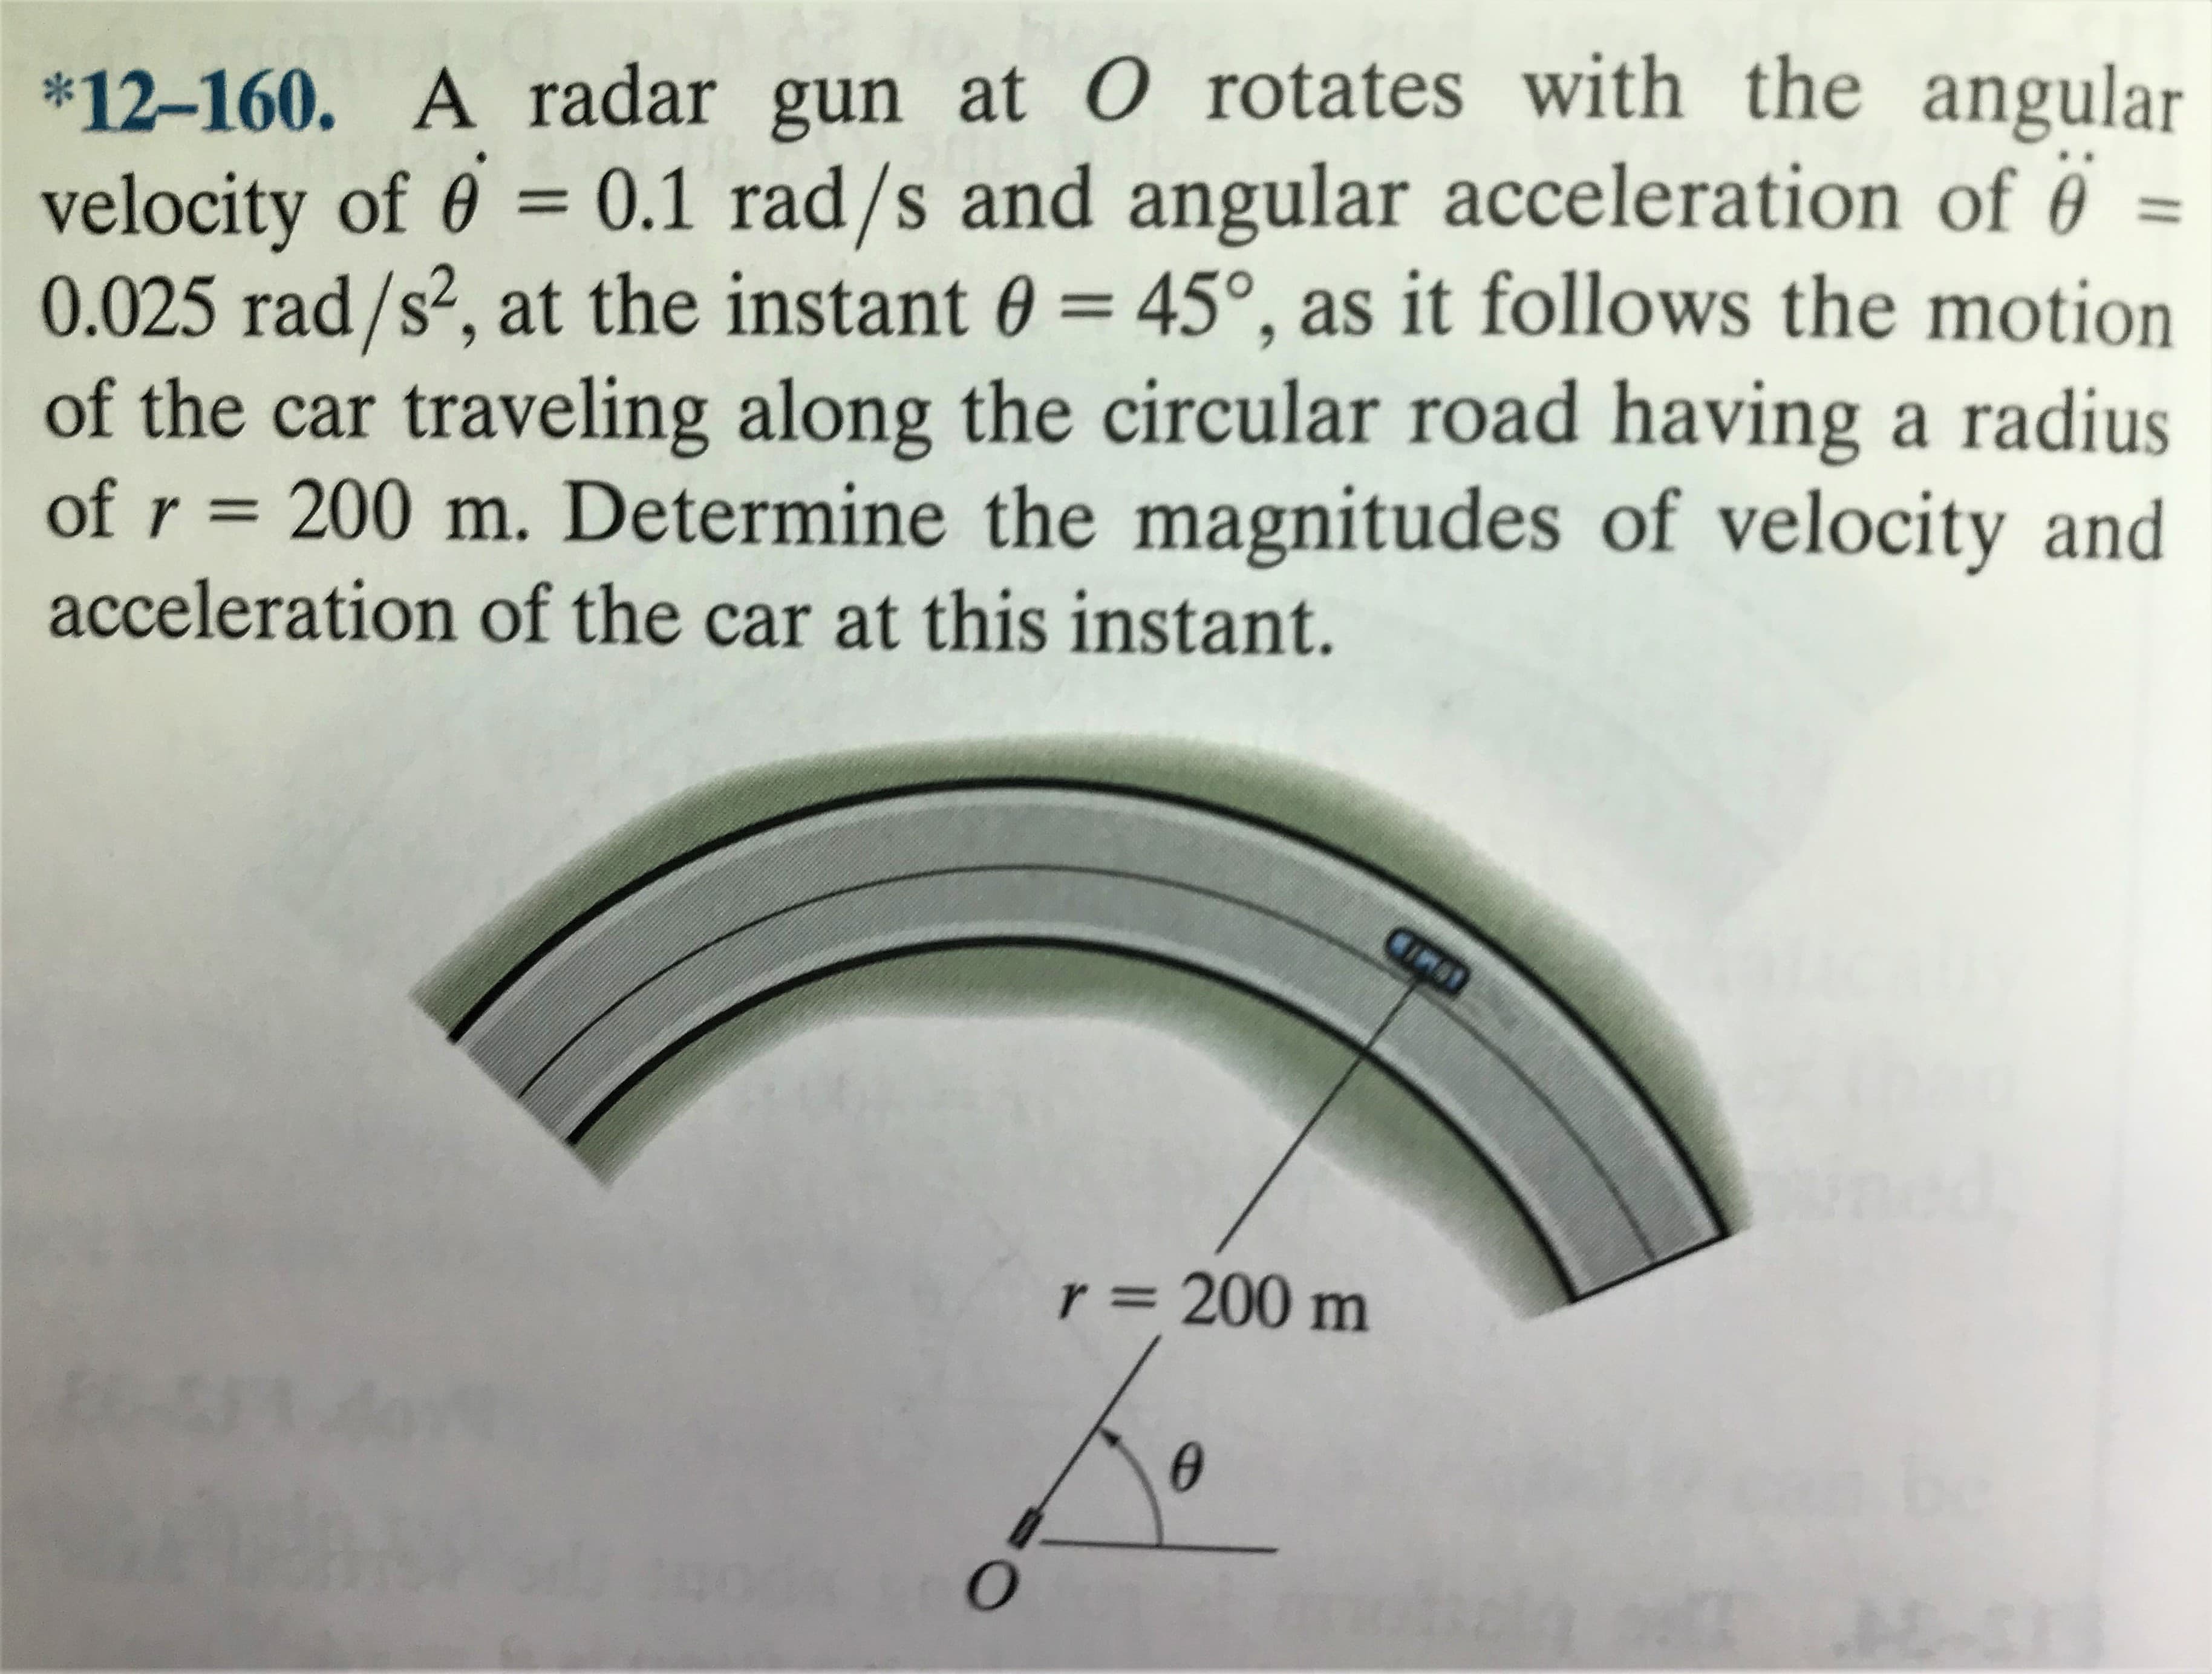 *12-160. A radar gun at 0 rotates with the angular
velocity of 6 = 0.1 rad/s and angular acceleration of ë =
0.025 rad/s², at the instant 0 = 45°, as it follows the motion
of the car traveling along the circular road having a radius
of r = 200 m. Determine the magnitudes of velocity and
acceleration of the car at this instant.
%3D
COMID
Nined
r = 200 m
%3D
